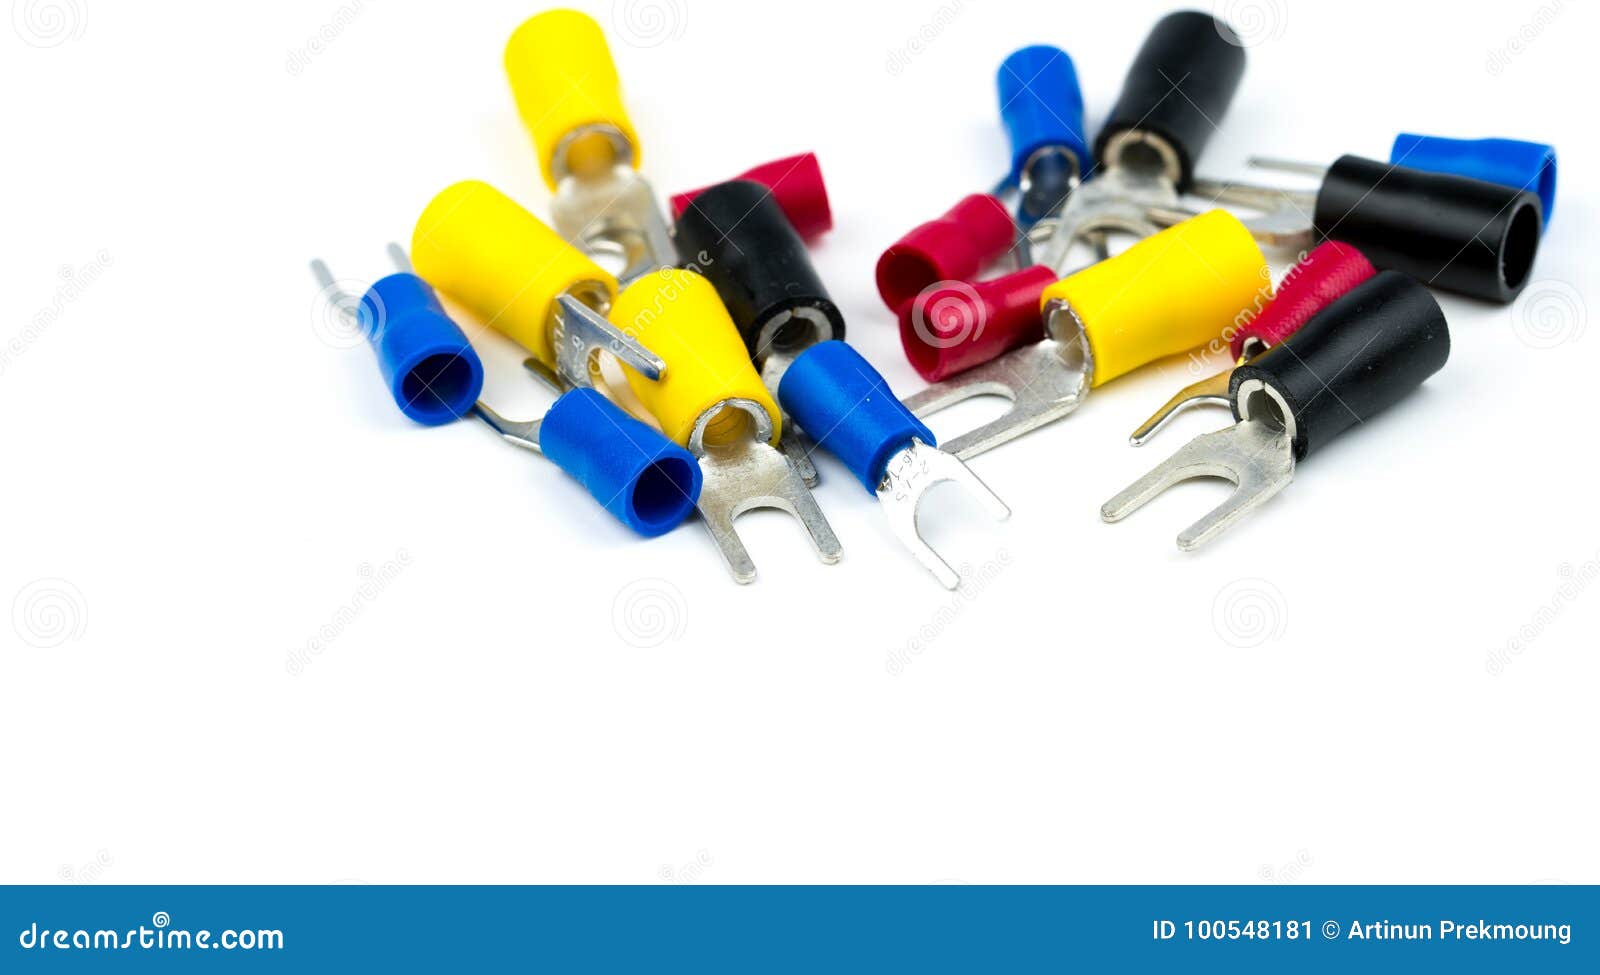 group of spade terminals electrical cable connector accessories